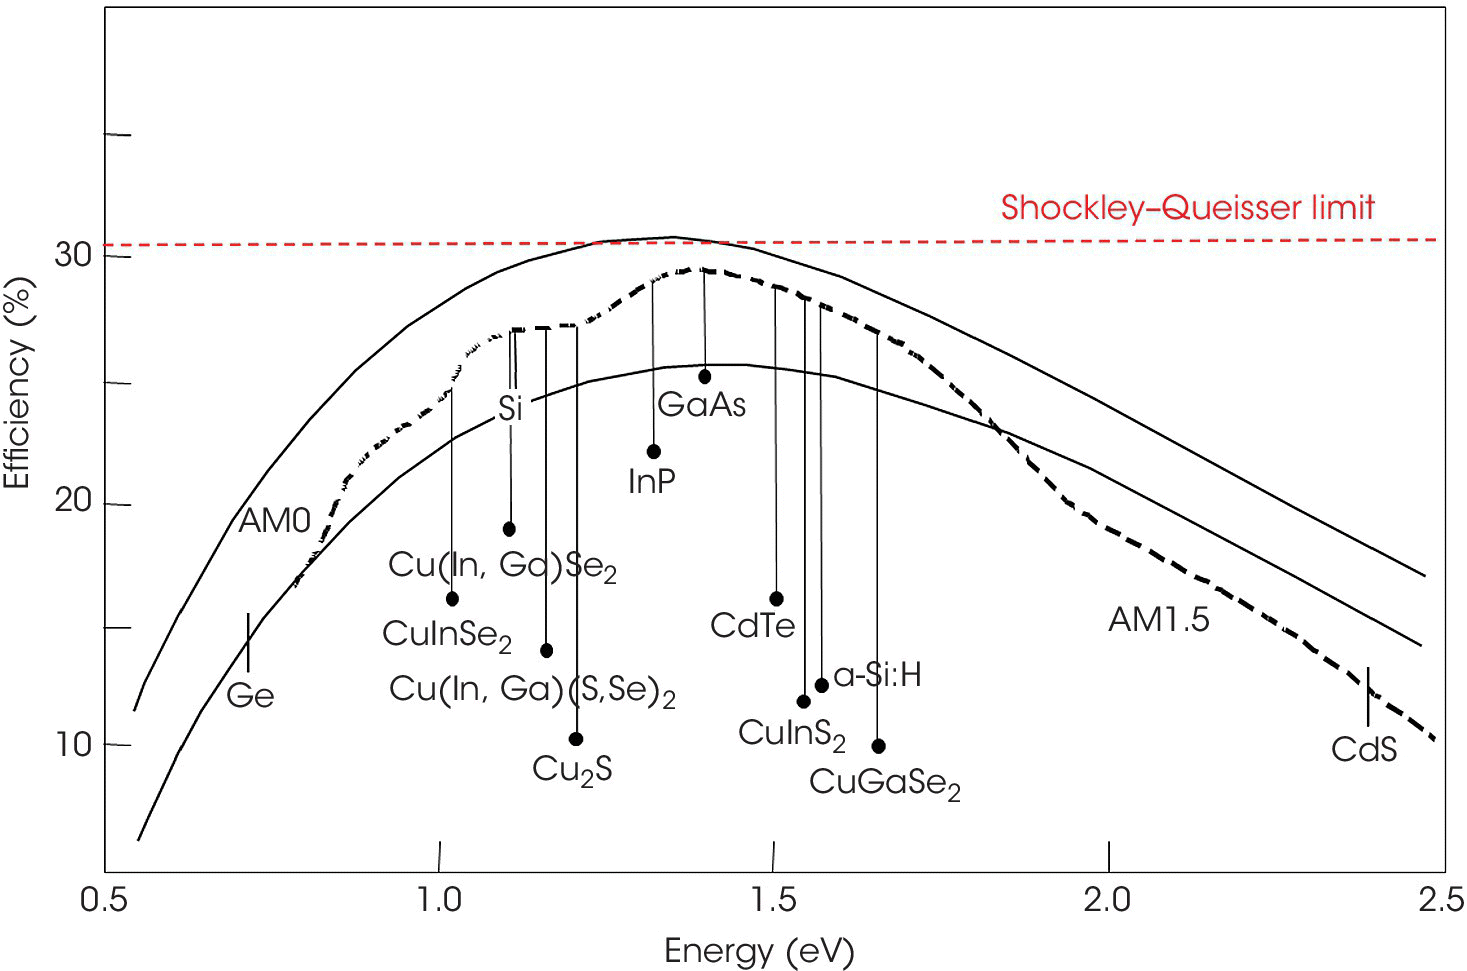 Graph of theoretical efficiencies of solar cell types vs. energy bandgap displaying 3 curves with labels GaAs, Si, InP, CuInSe2, Ge, AM0, AM1.5, etc. A horizontal line at 30% is labeled Shockley–Queisser limit.